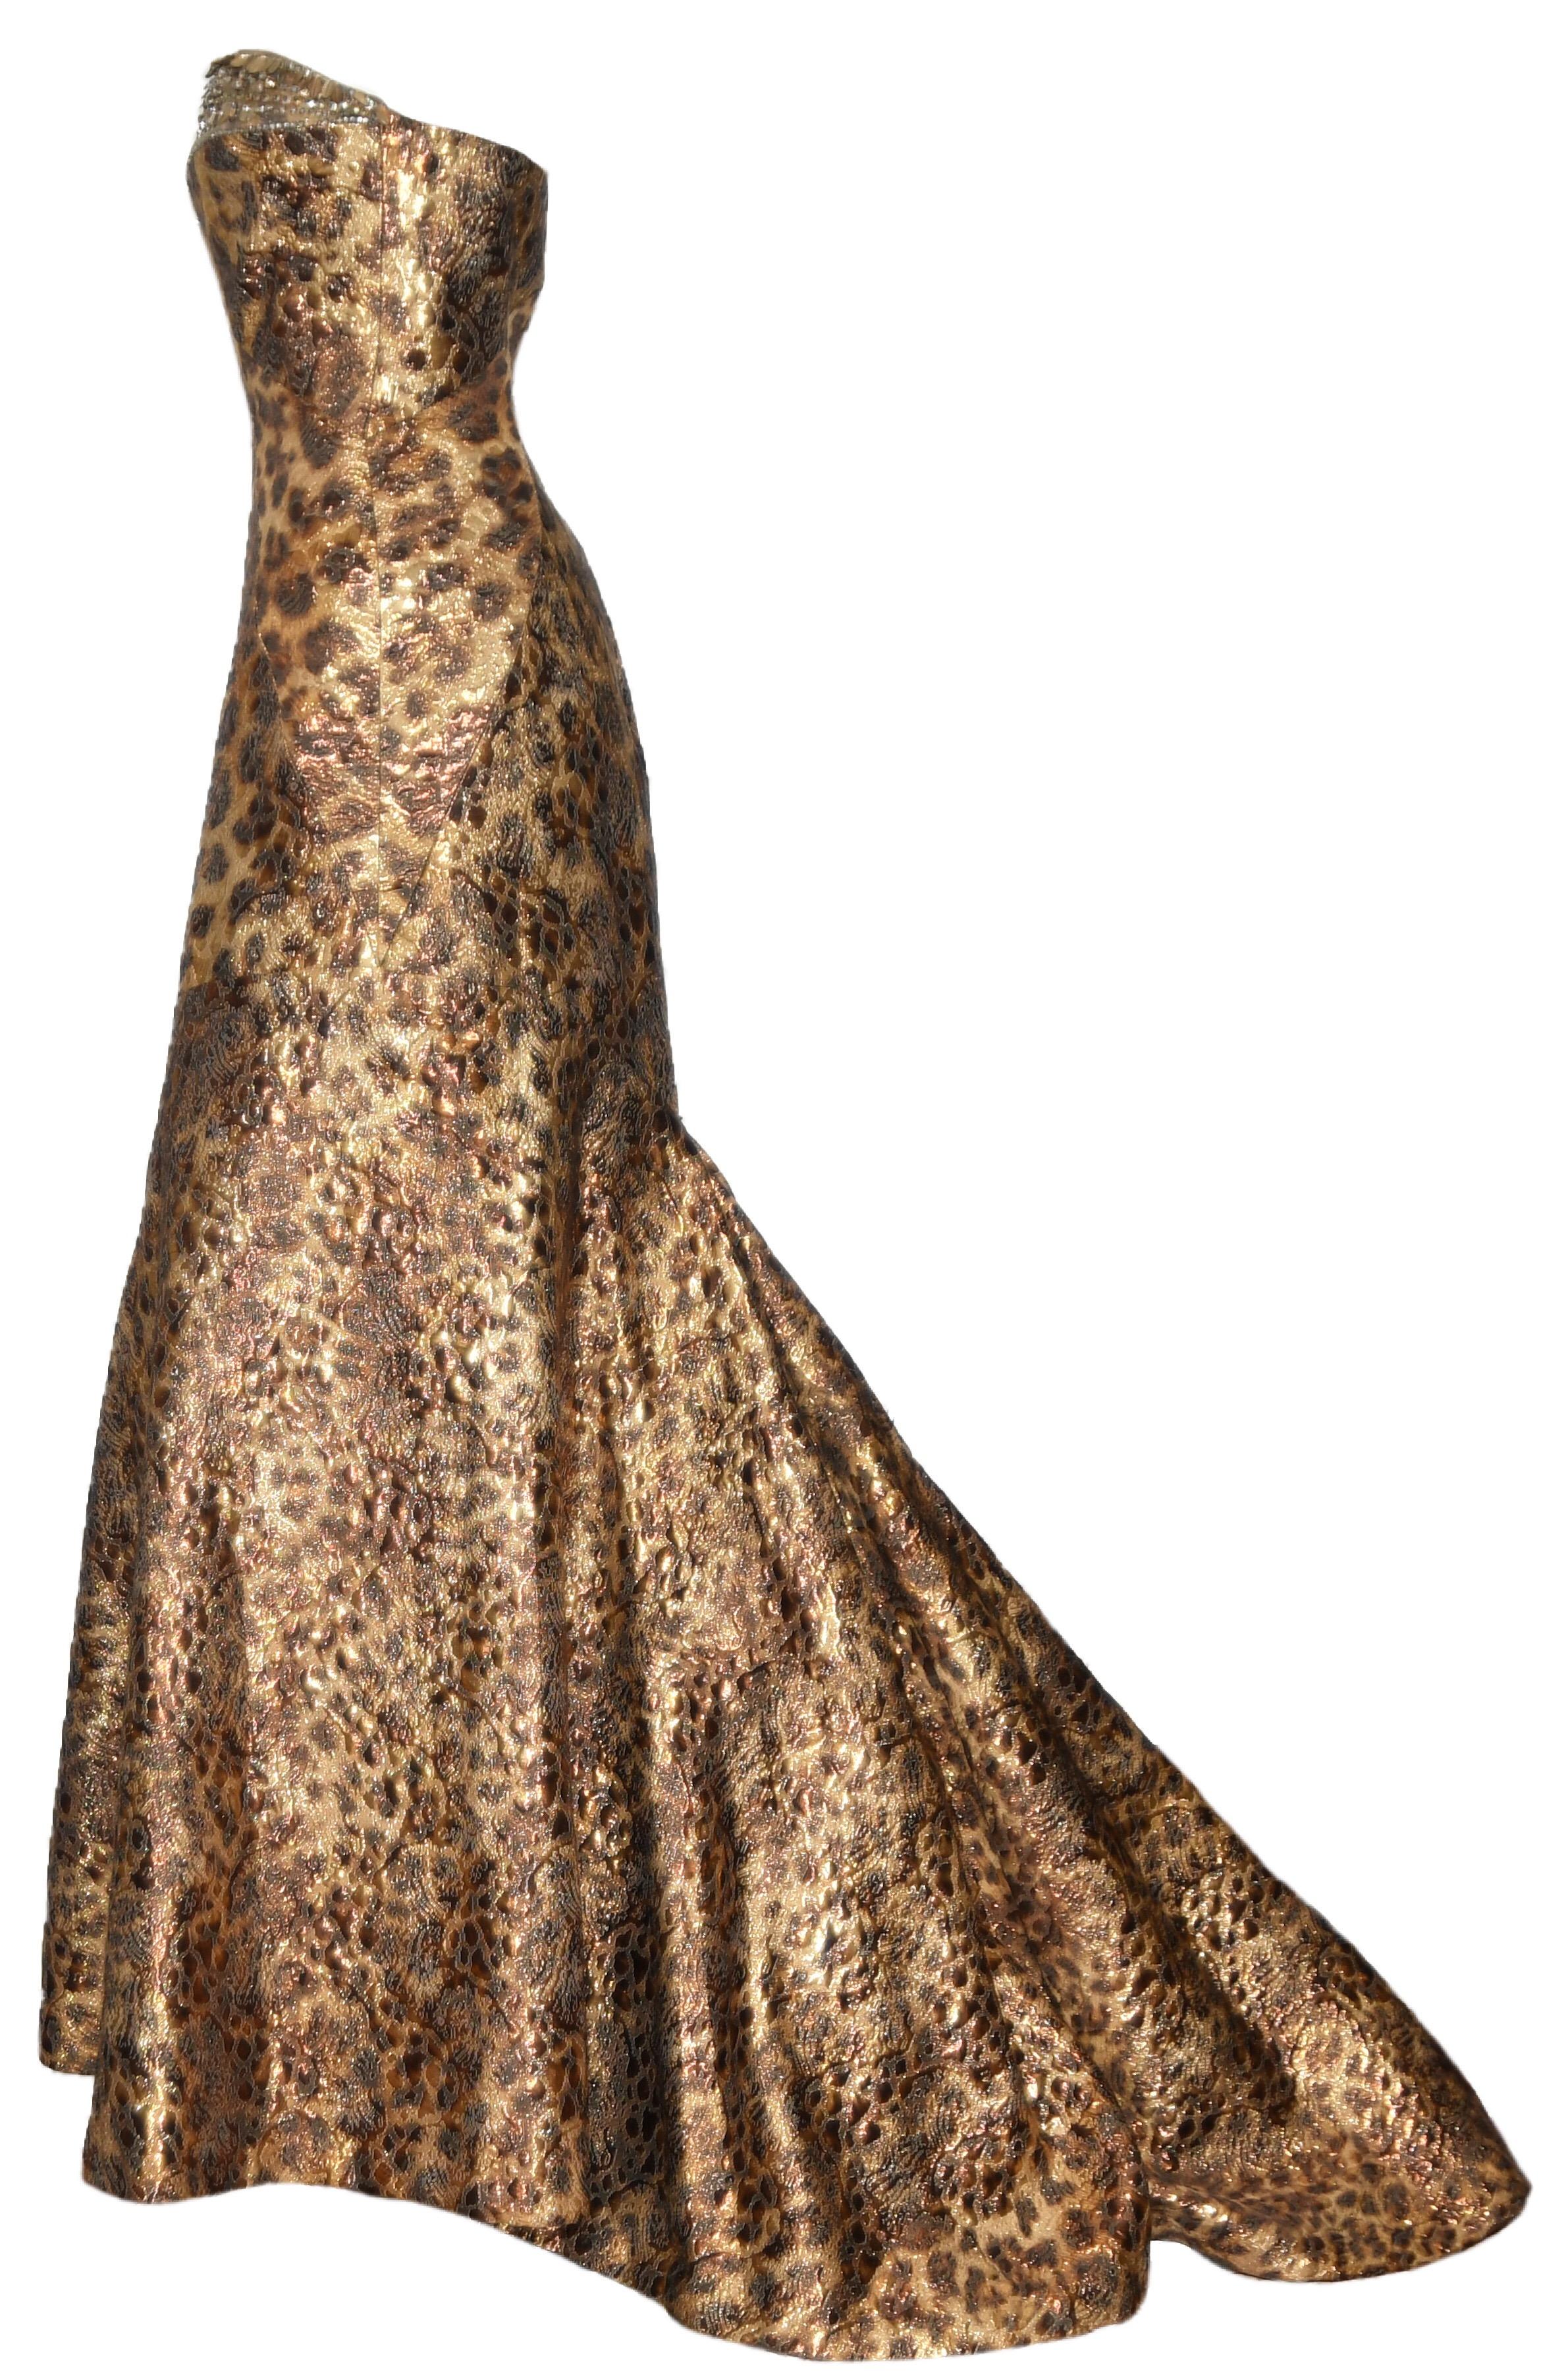 Naeem Khan leopard print brocade gown in luxurious gold tone threads is intertwined with copper tone lame.   The bodice is trimmed at the bust by crystals, beads and metal accents in gold tone.  This strapless gown culminates in a grand gathered